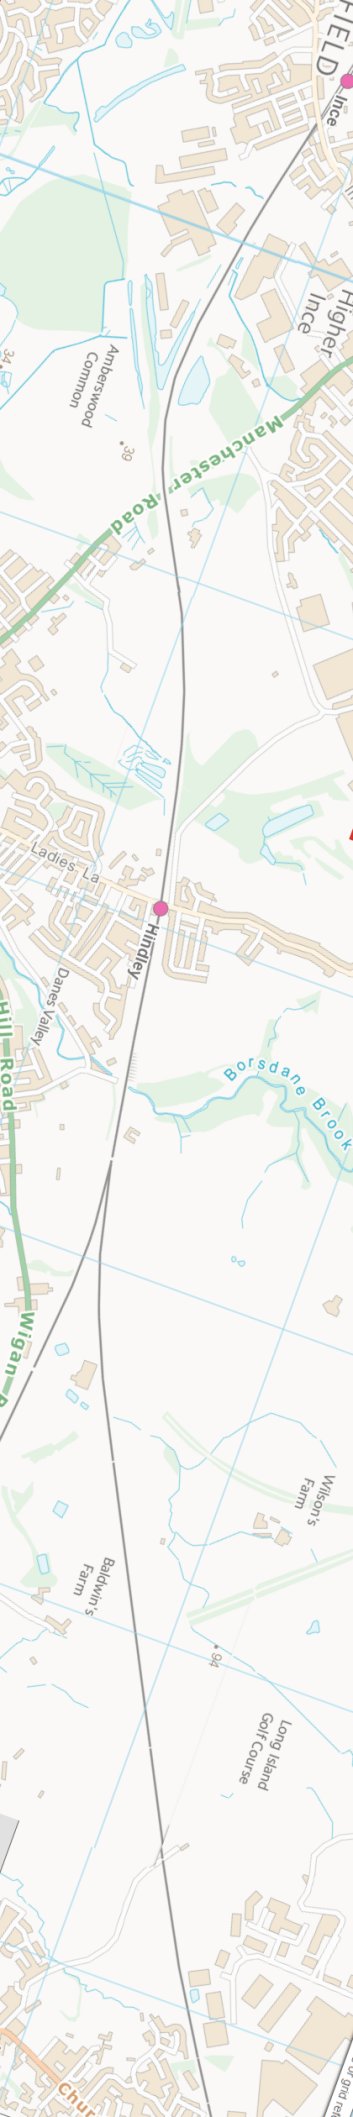 Section from the Ordnance Survey OpenSource mapping 2013 showing L&YR railway line from Ince to Hindley railway station